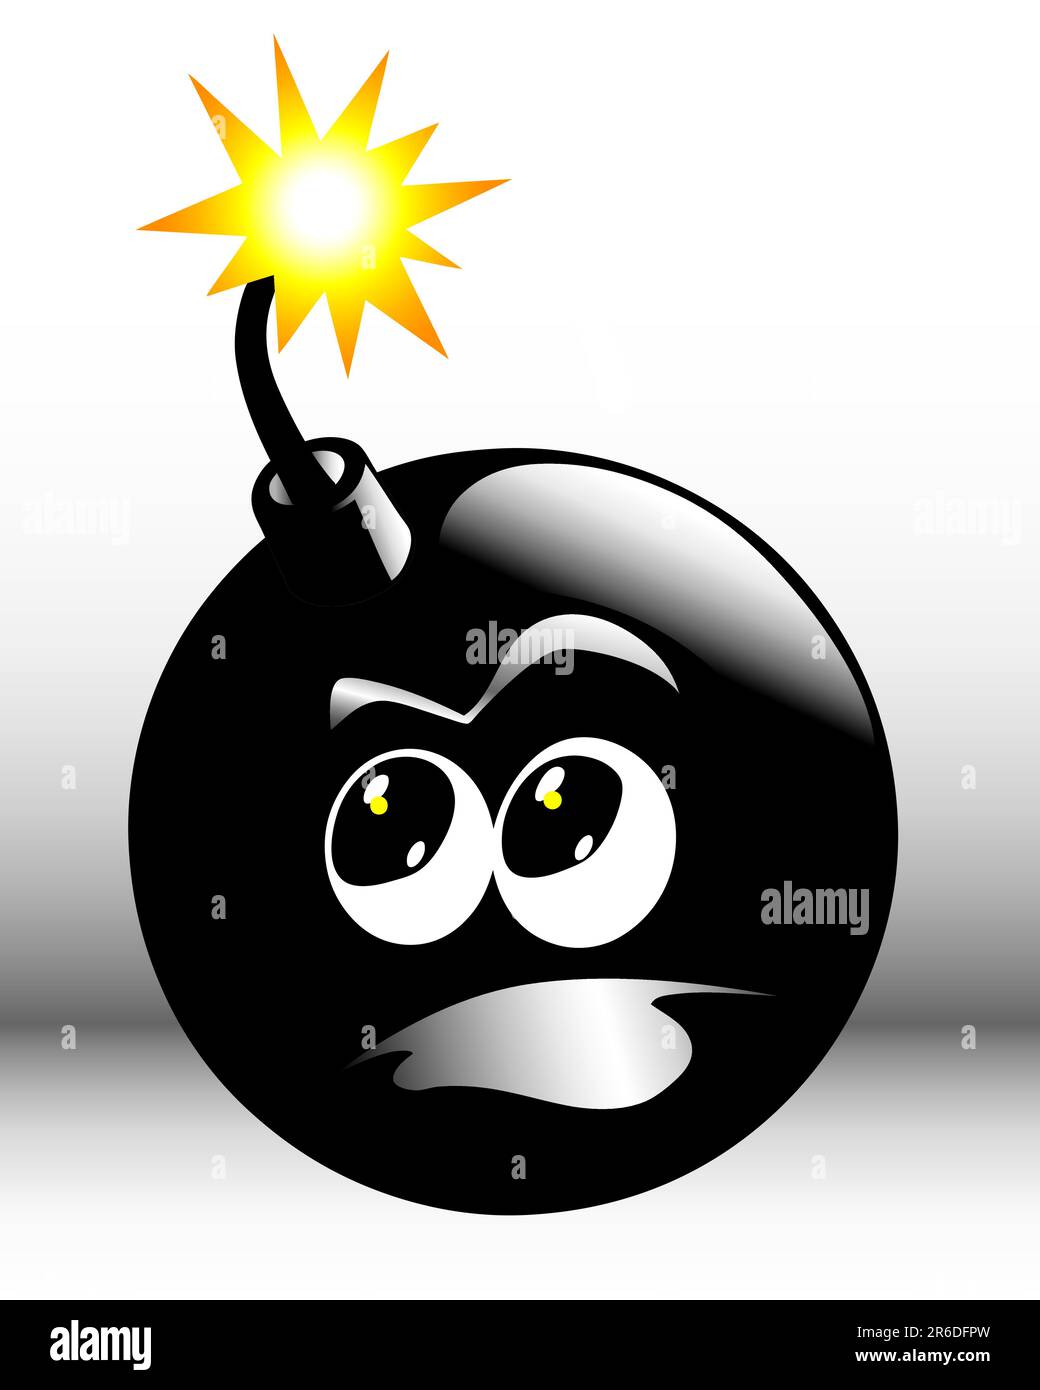 vector illustration of a bomb with lighted fuse Stock Vector